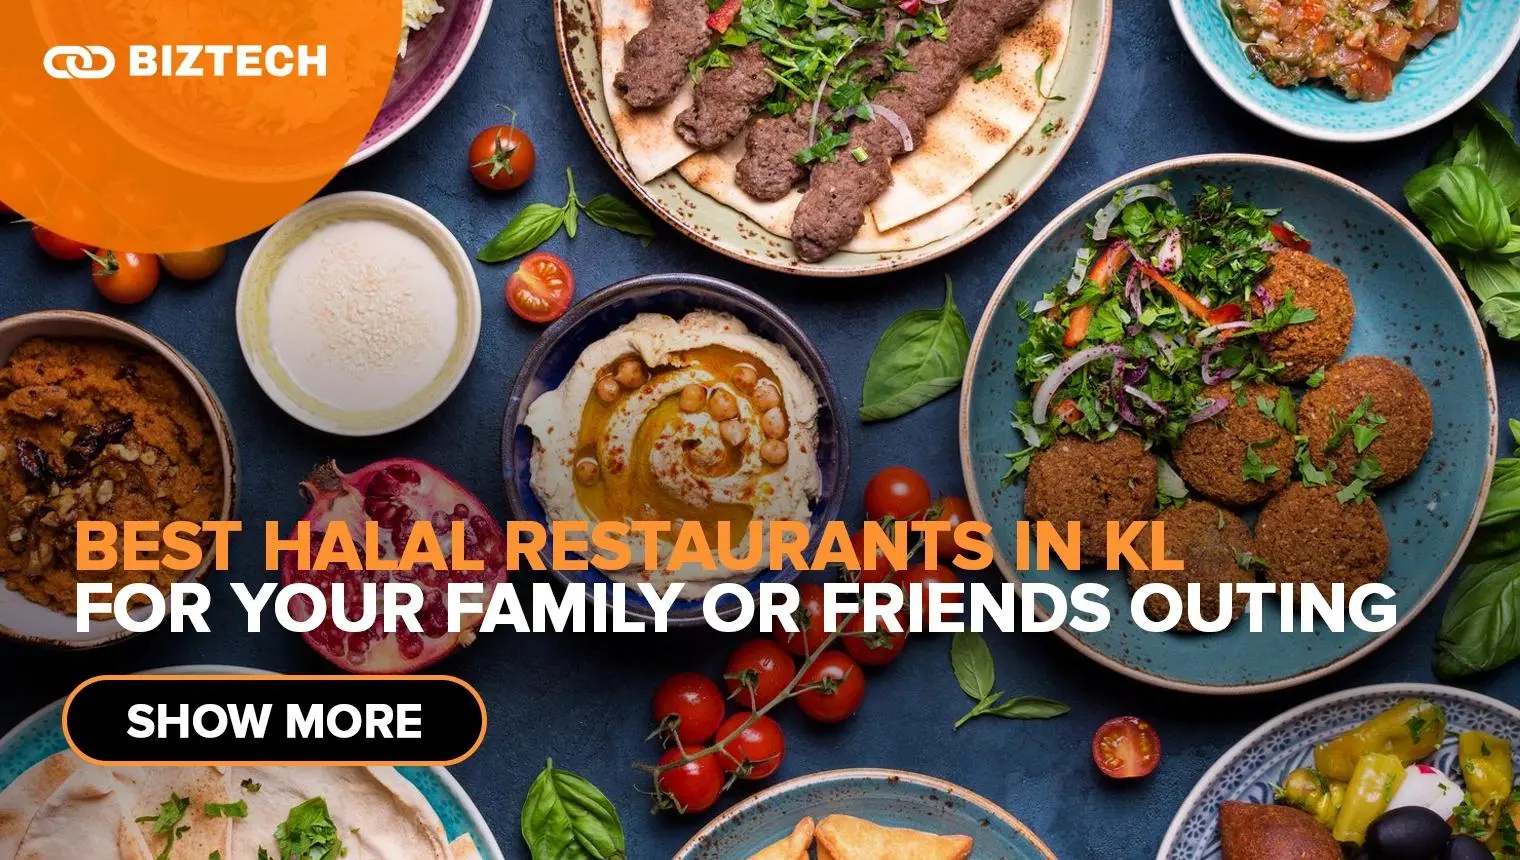 10 Best Halal Restaurants in KL for Your Family or Friends Outing